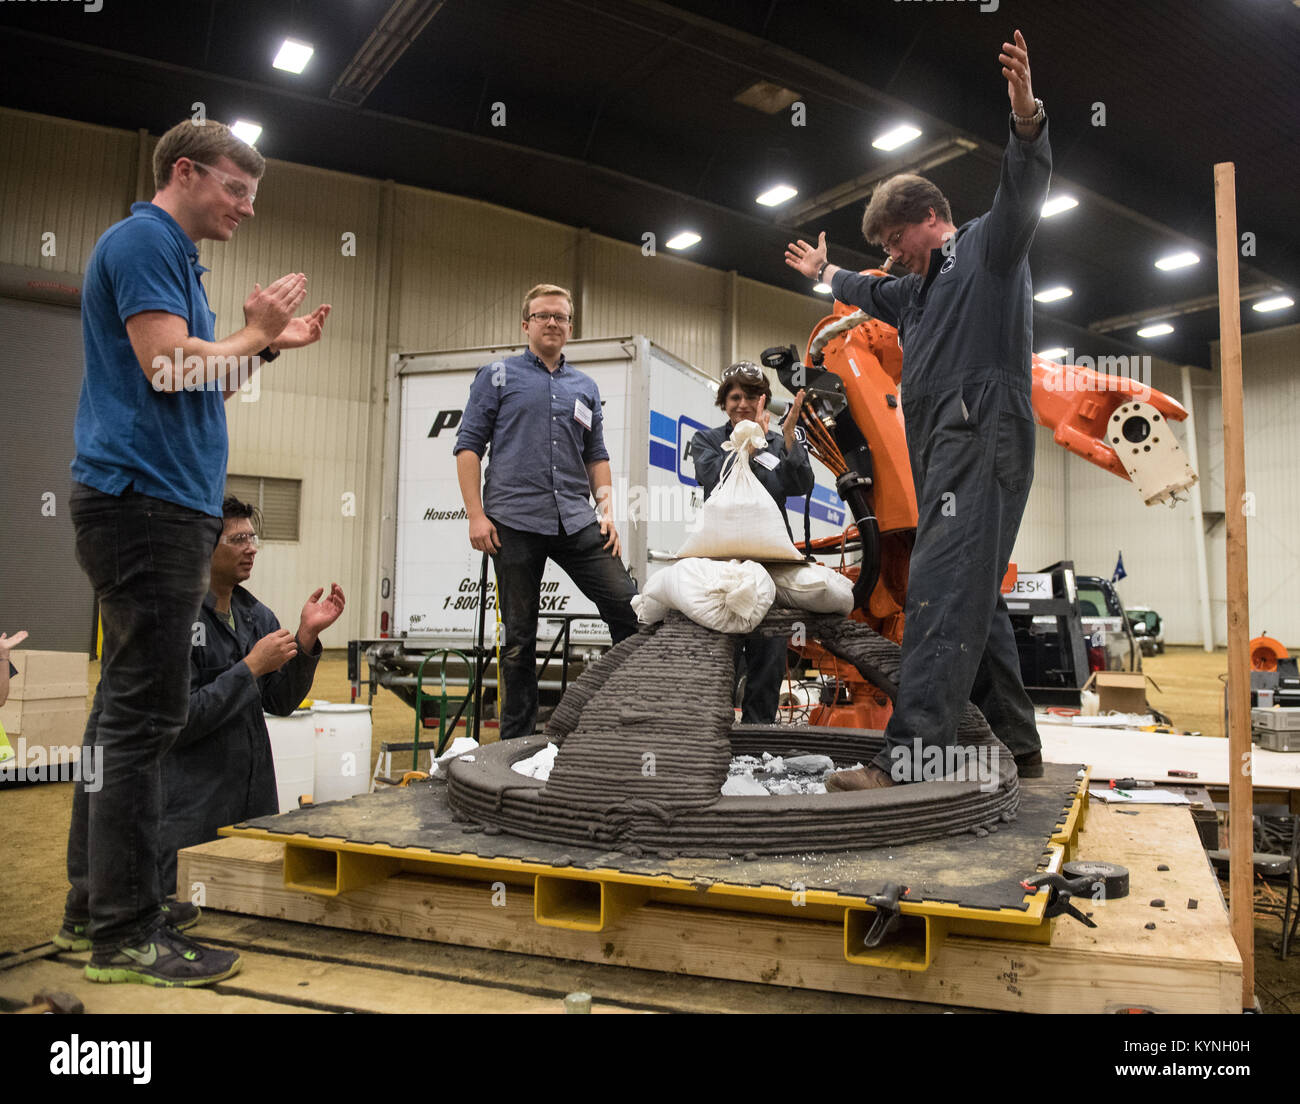 Members of the Penn State Den@Mars team of University Park, Pa., celebrate after their 3D-printed dome structure successfully held 50 kilograms in order to qualify for final testing, Saturday, Aug. 26, 2017 at Caterpillar, Inc.'s Edwards Demonstration and Learning Center in Peoria, Ill. NASA's 3D-Printed Habitat Challenge is advancing the additive construction technology needed to create sustainable housing for deep space exploration. Teams are competing in Phase 2: Level 3, for $500,000 in prize money. Teams have to 3D-print structural habitat pieces that will be crush-tested and evaluated, a Stock Photo